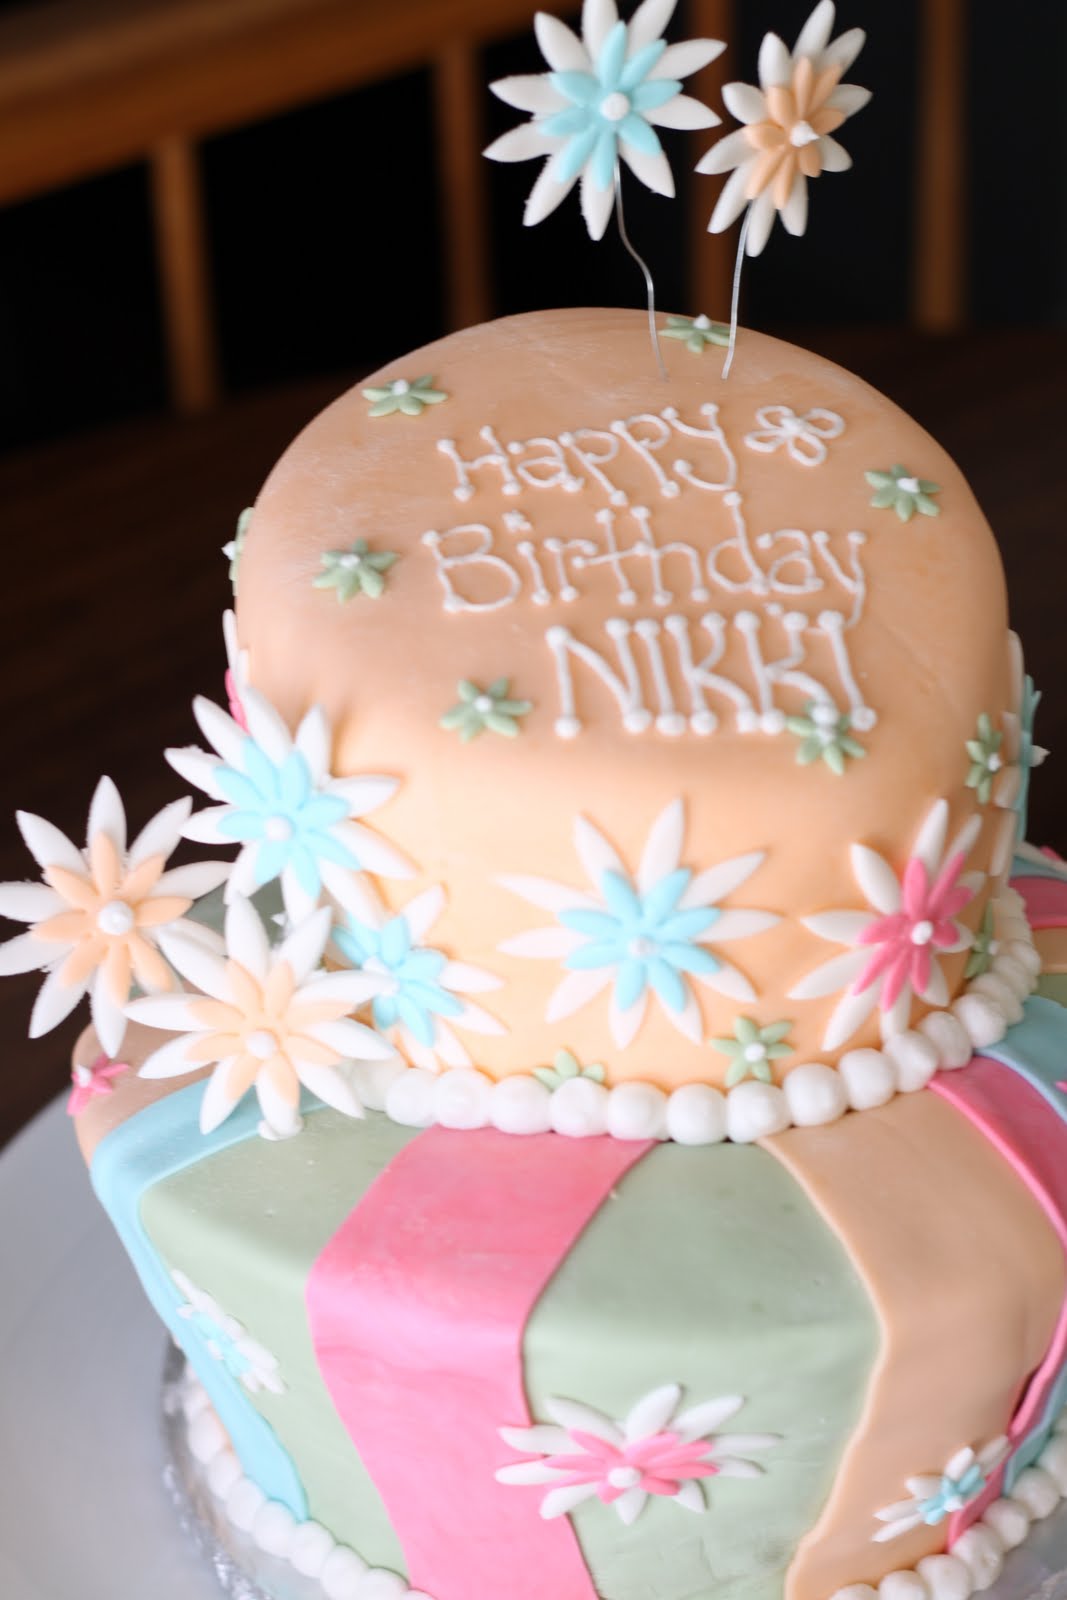 Image result for happy birthday nikki images